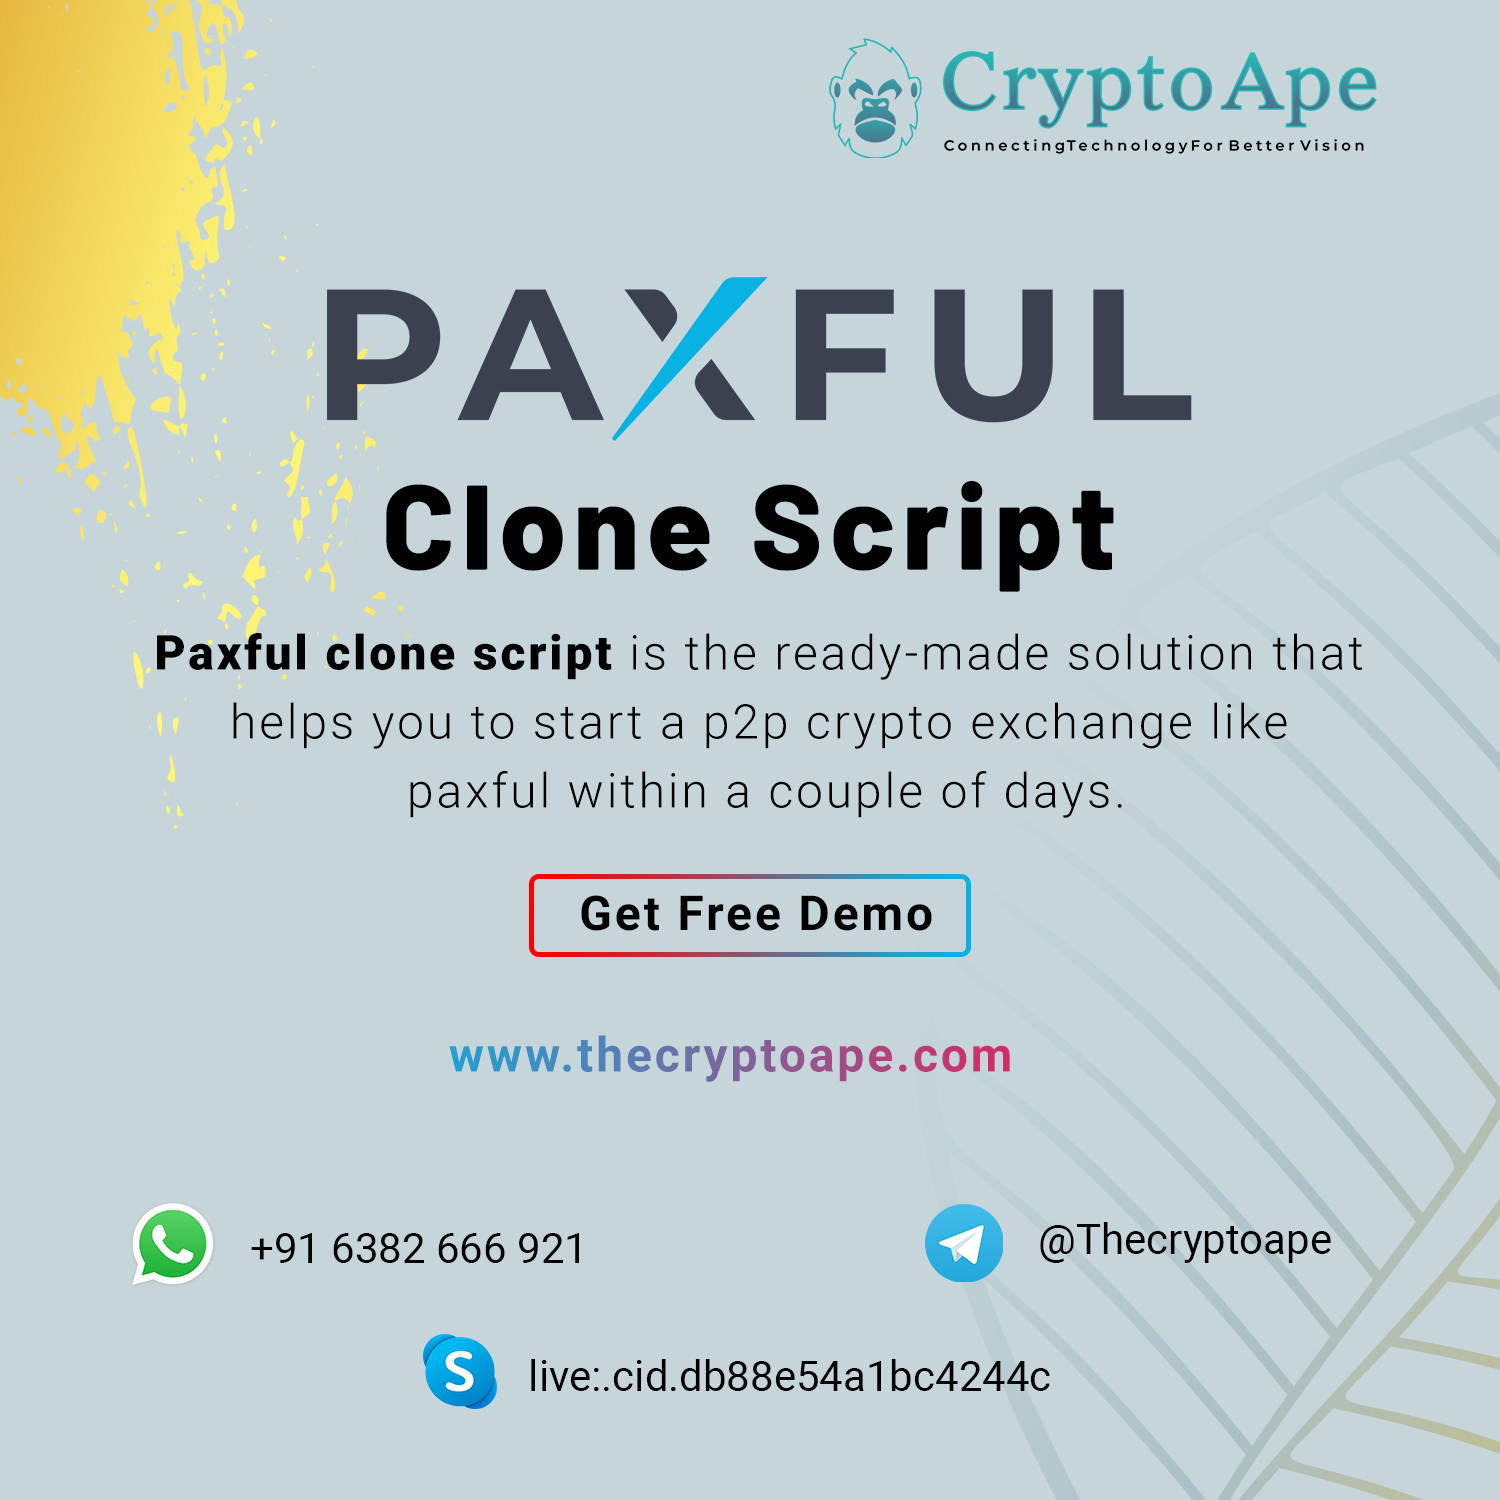 ¥: CryptoApe

ConnectingTechnologyFor Better Vision

PAAFUL

Clone Script

Paxful clone script is the ready-made solution that
helps you to start a p2p crypto exchange like
paxful within a couple of days.

| Get Free Demo

ww.thecryptoape.com

+91 6382 666 921 @Thecryptoape

©) 1ive:cid dbssessatbeazadc